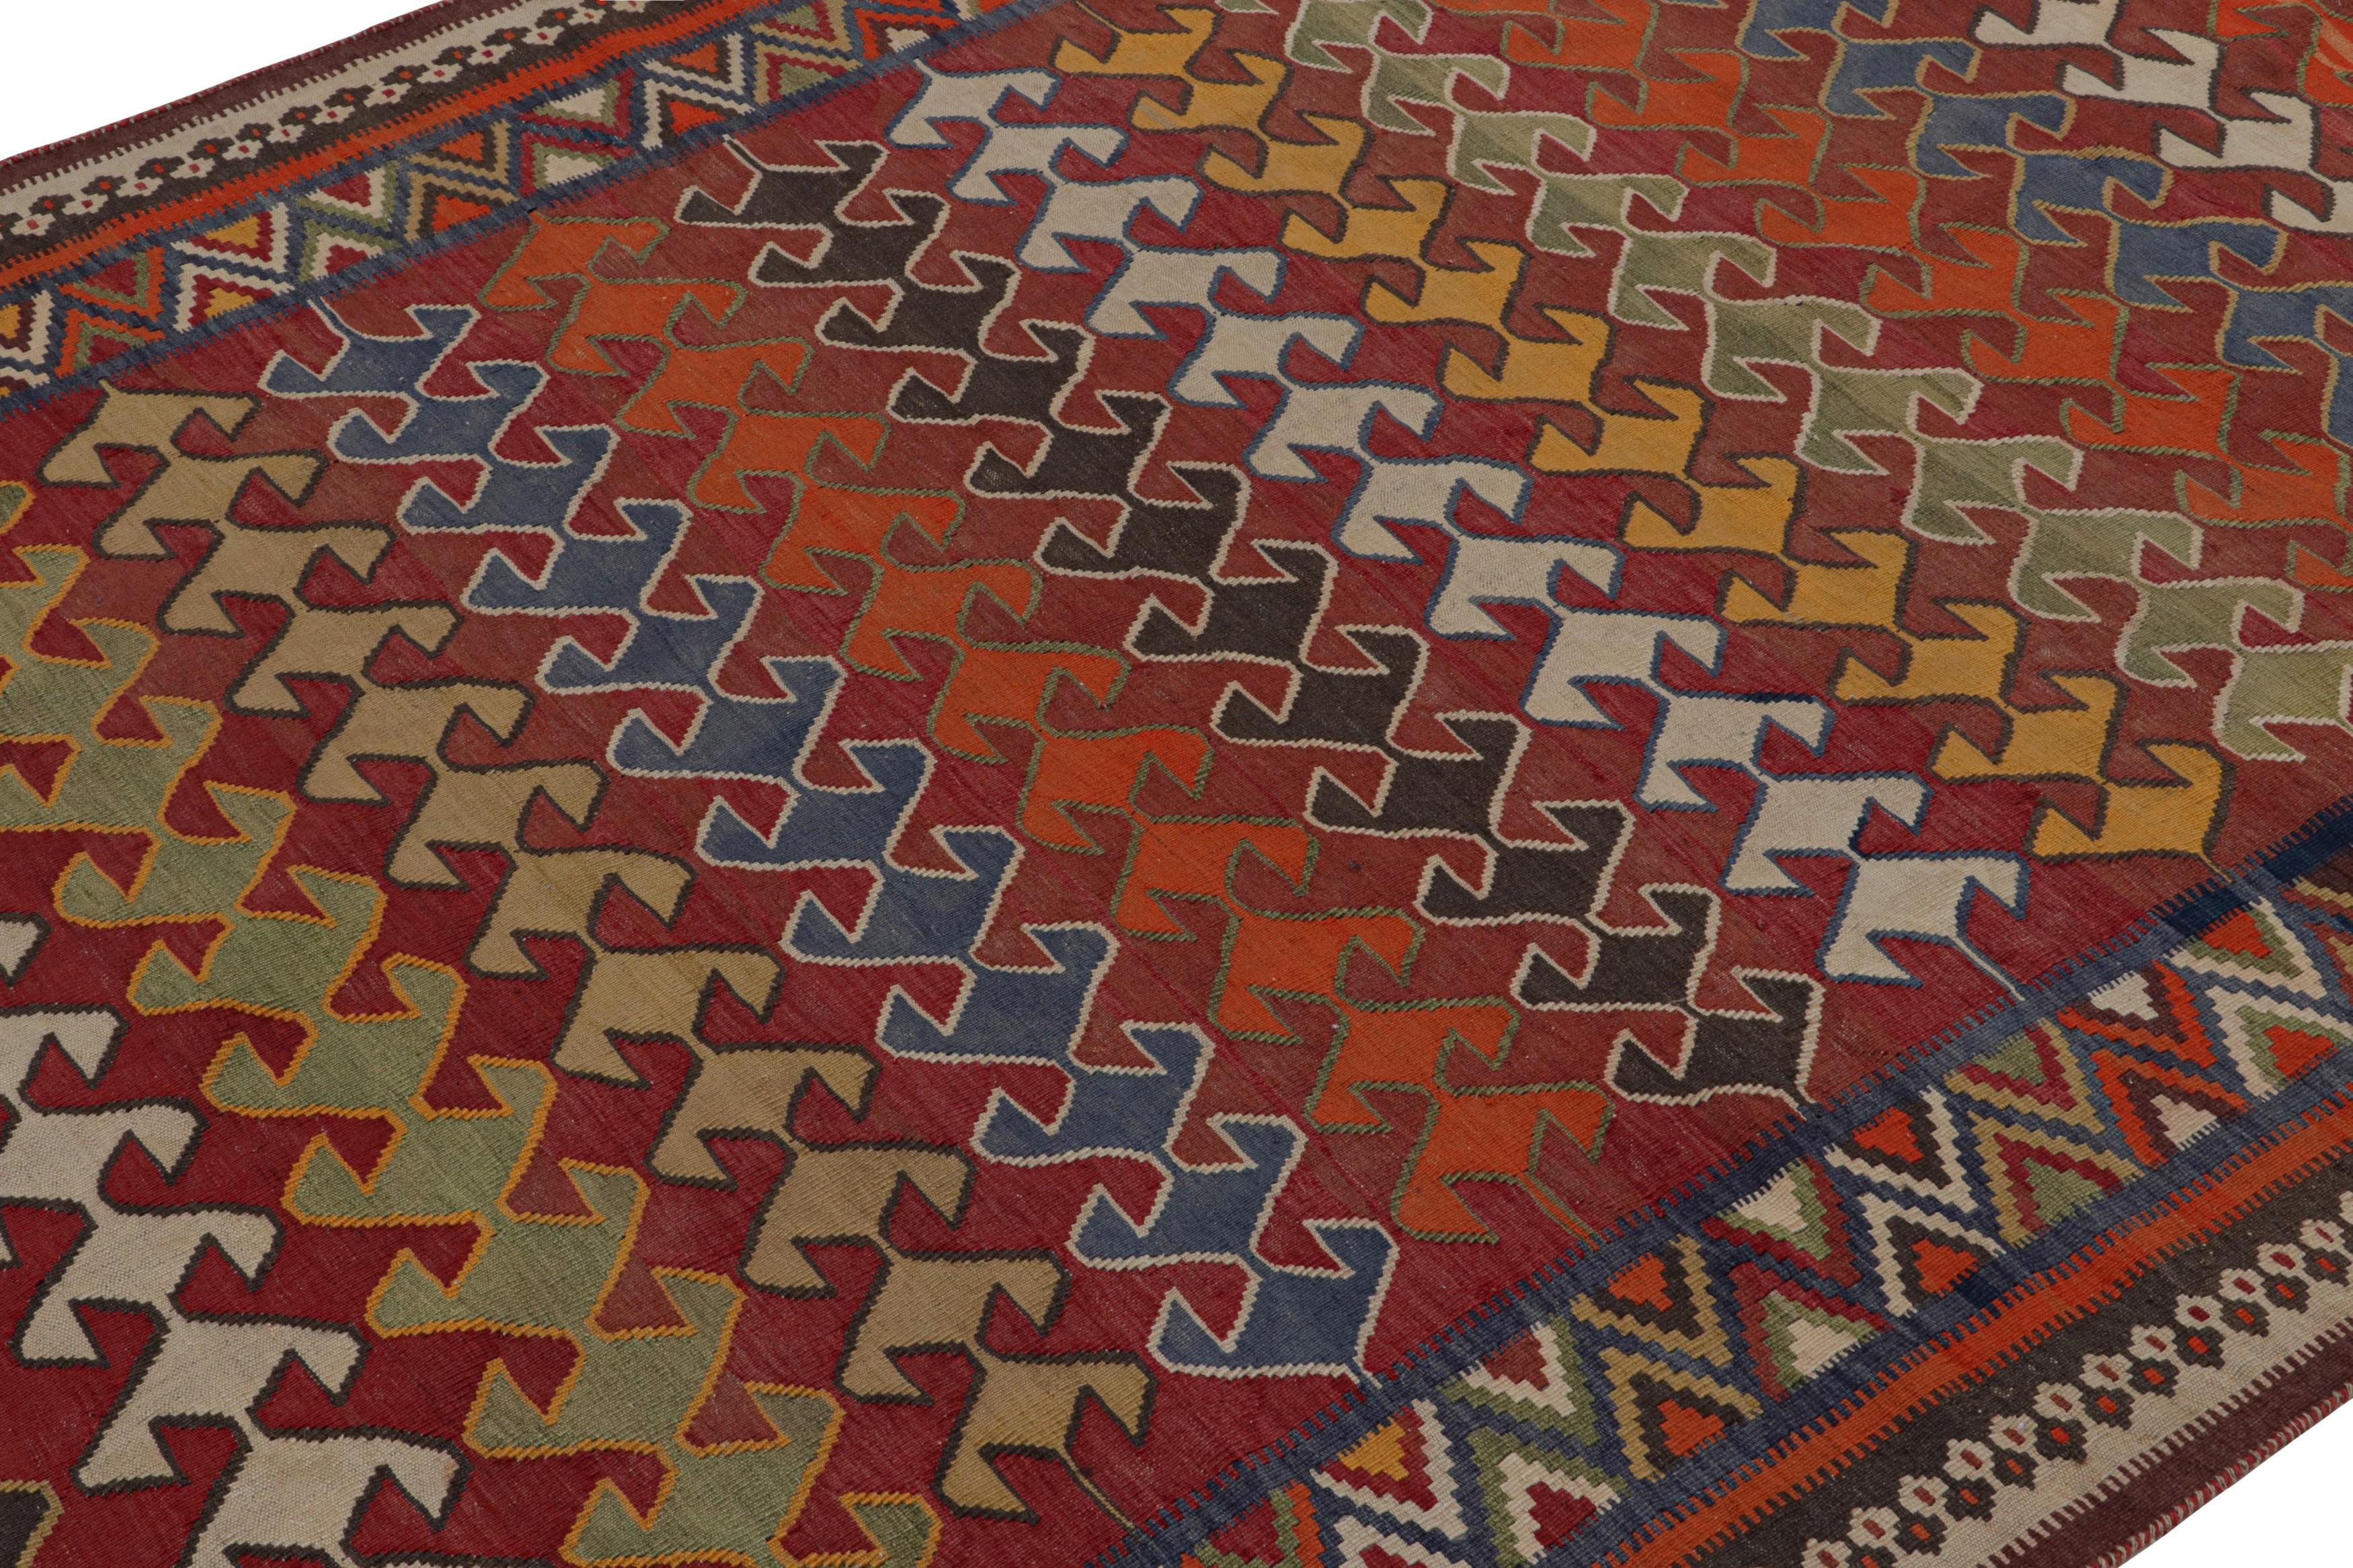 Hand-Woven Vintage Afghani tribal Kilim rug, with Geometric Patterns, from Rug & Kilim For Sale